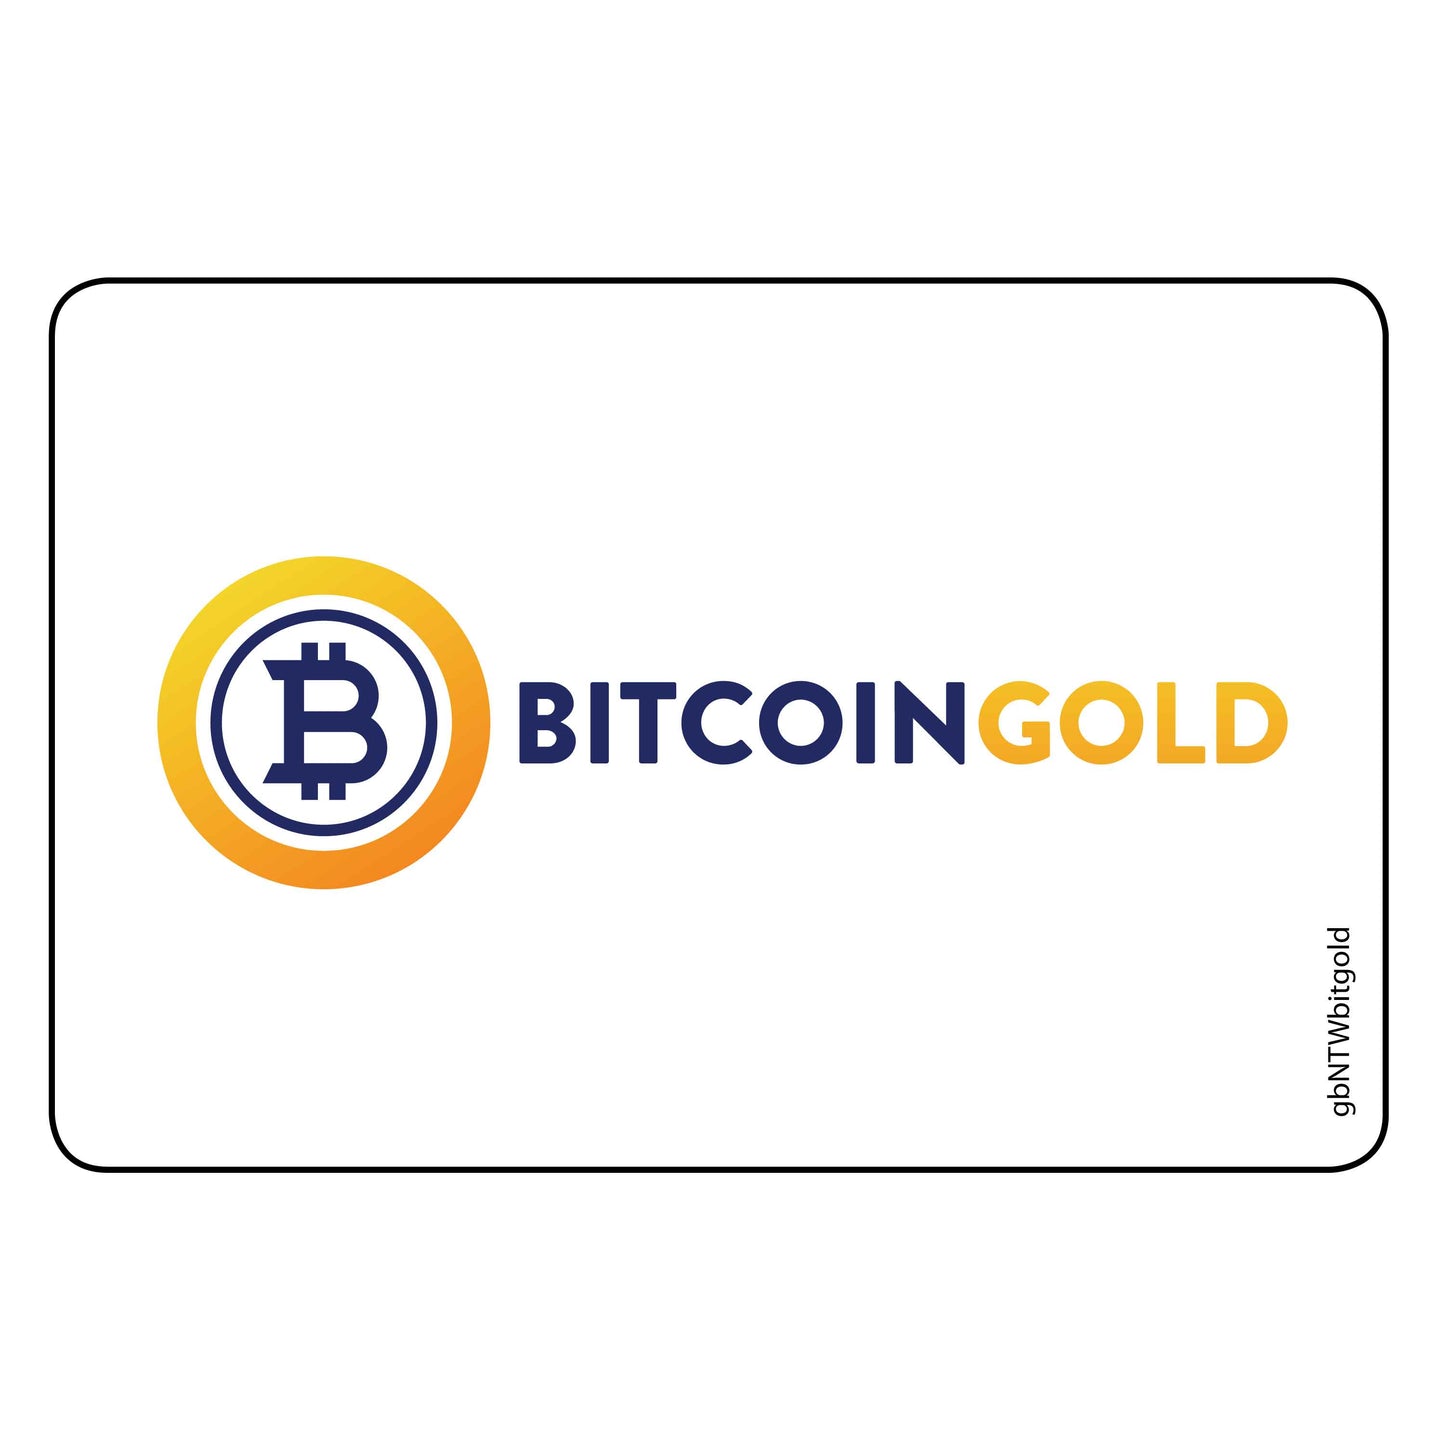 Single Network Decal, Bitcoin Gold Decal. 3 inches by 2 inches in size.